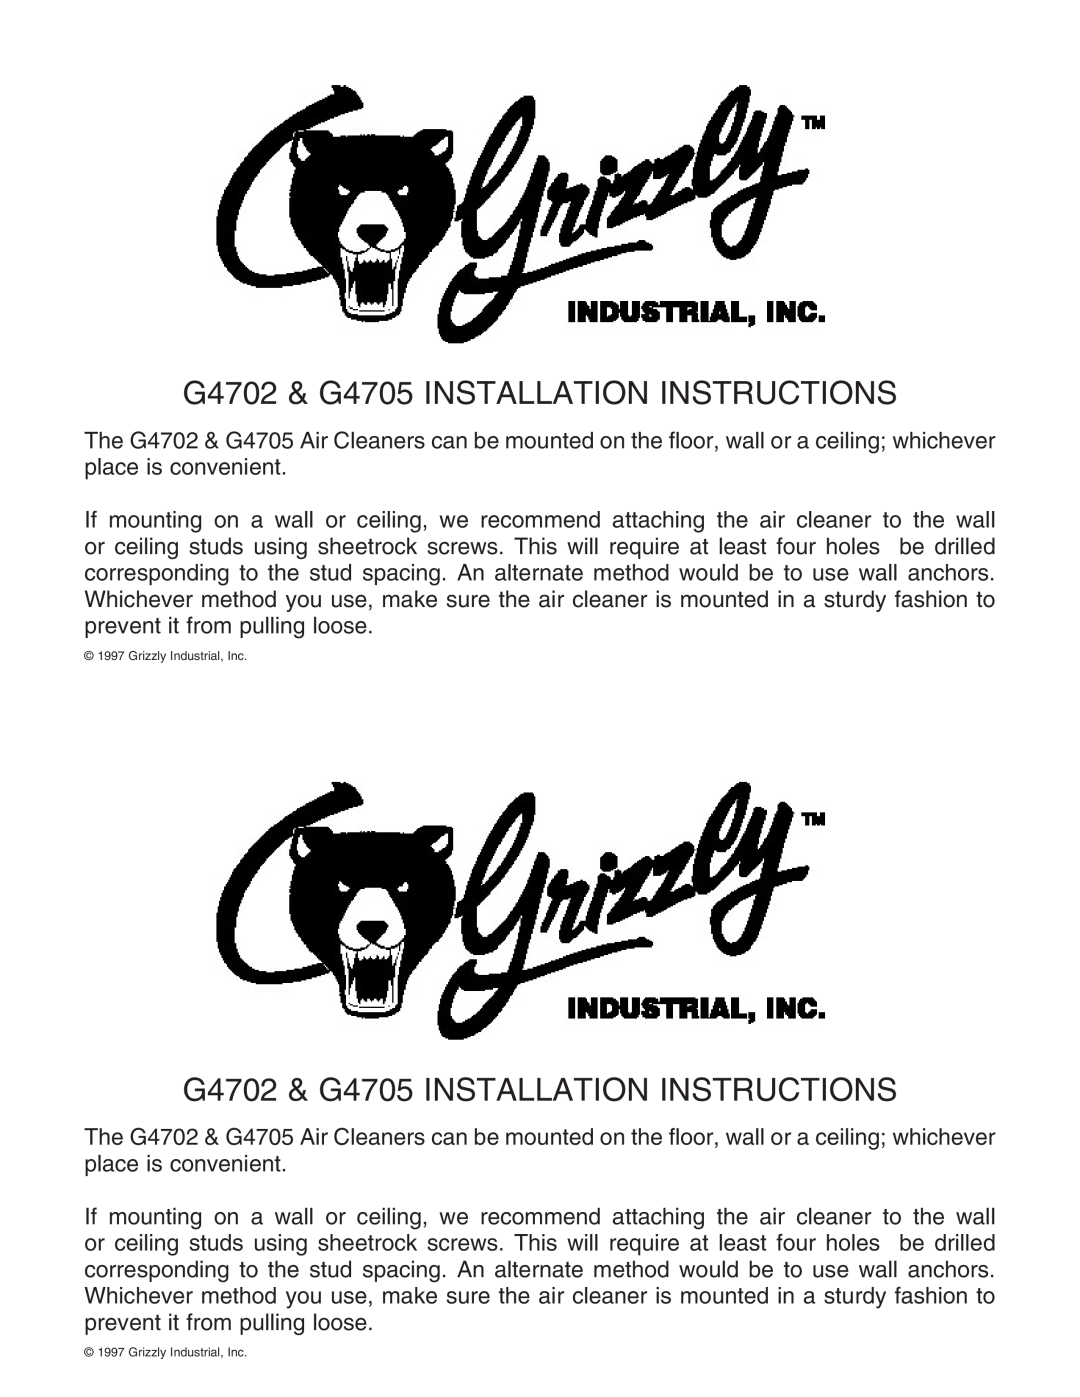 Grizzly installation instructions G4702 & G4705 INSTALLATION INSTRUCTIONS, Grizzly Industrial, Inc 